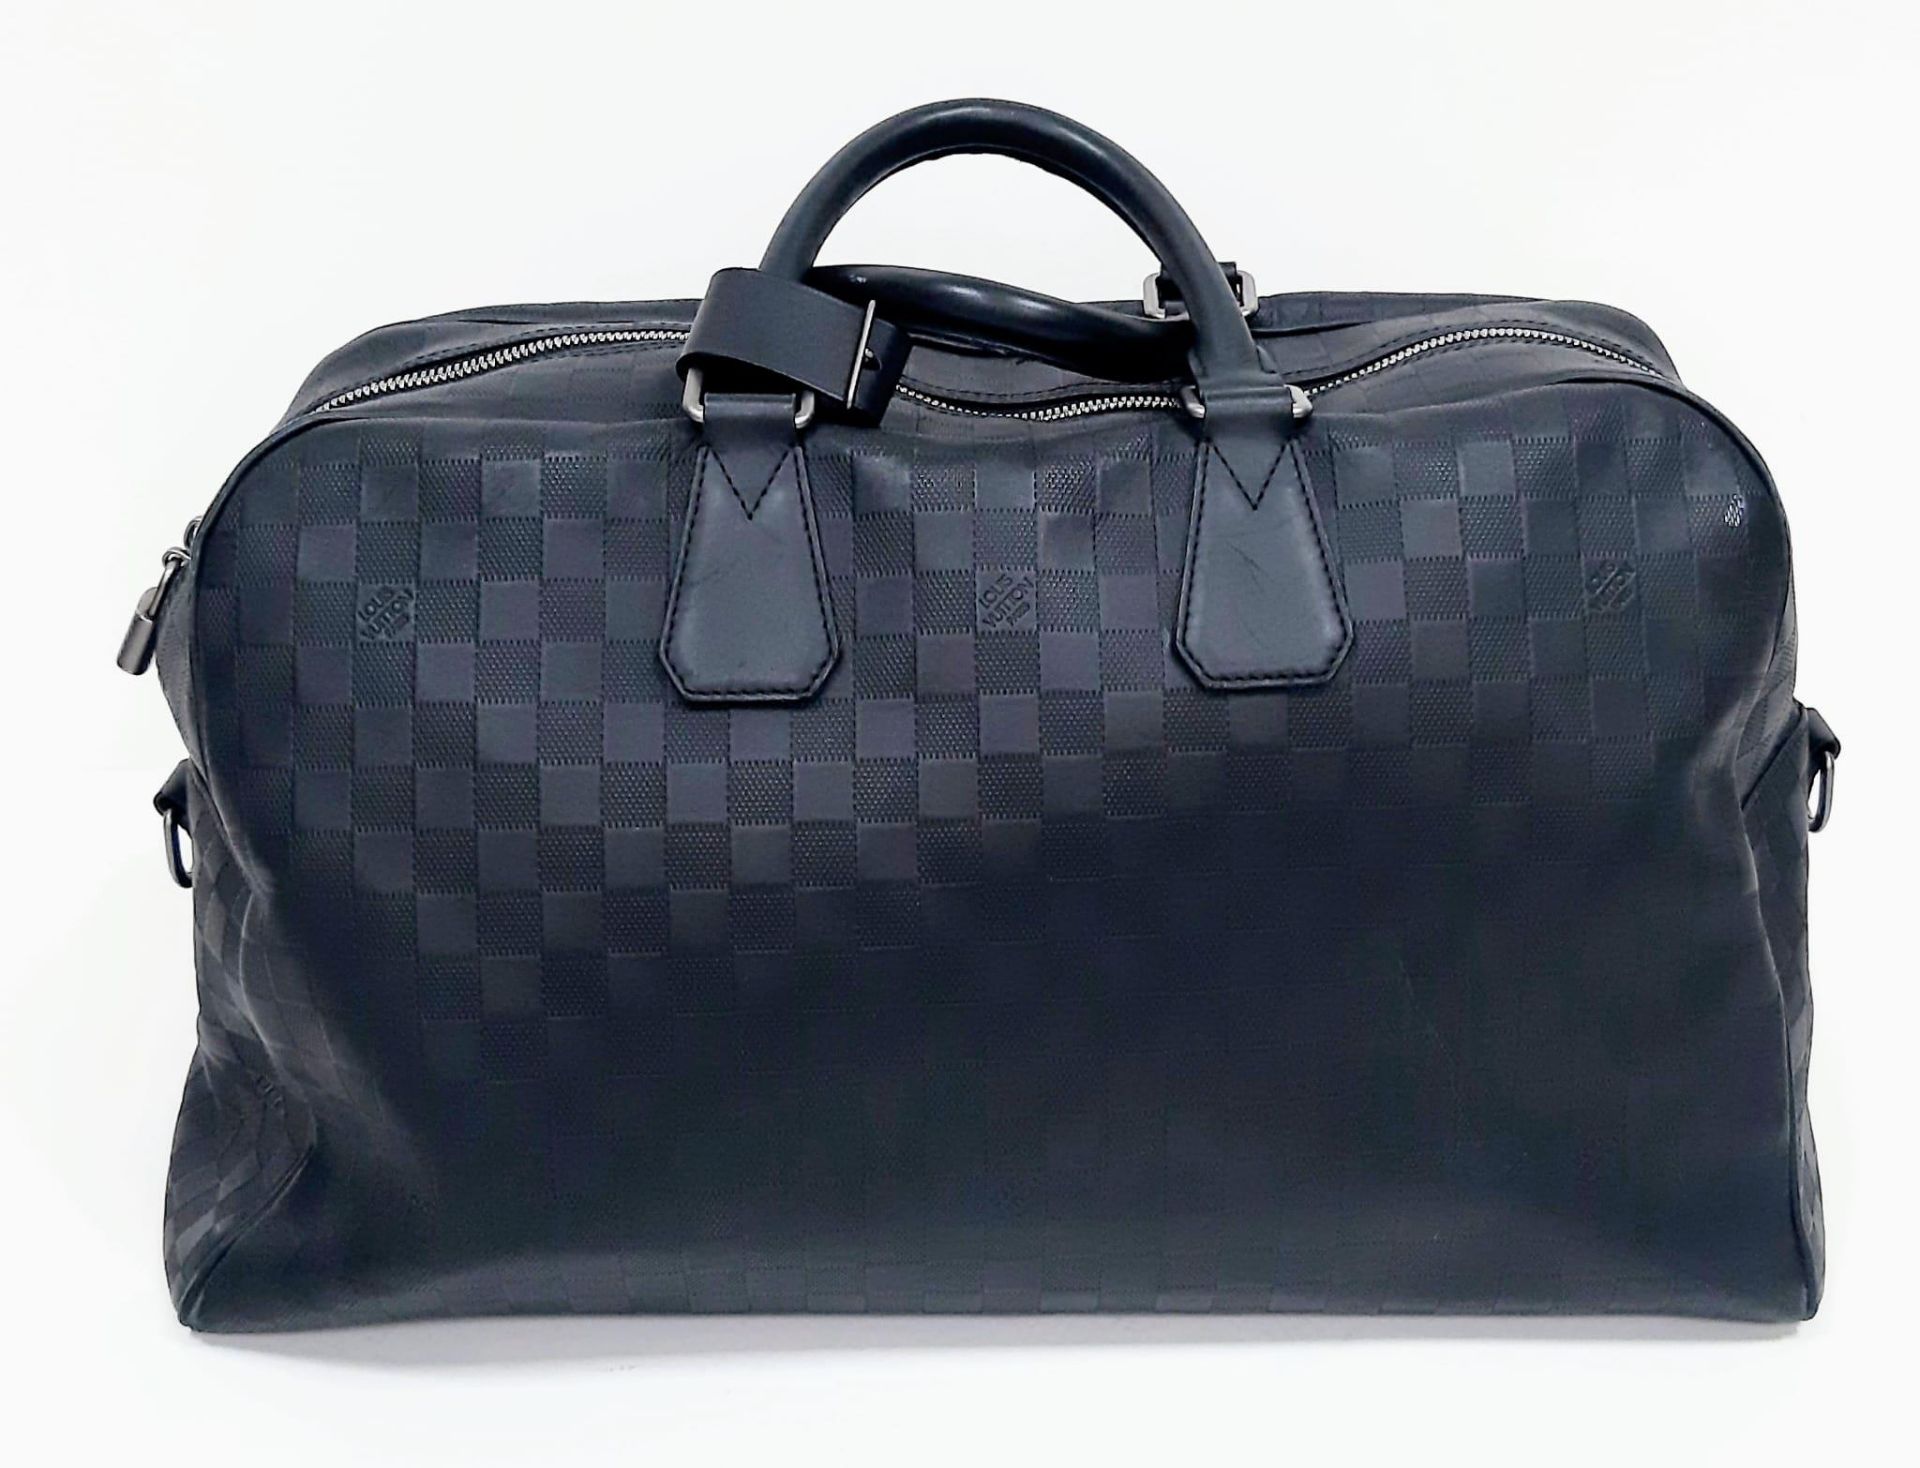 Louis Vuitton Keepall Luggage Bag. Black leather exterior with Silver toned hardware and typical - Image 2 of 8